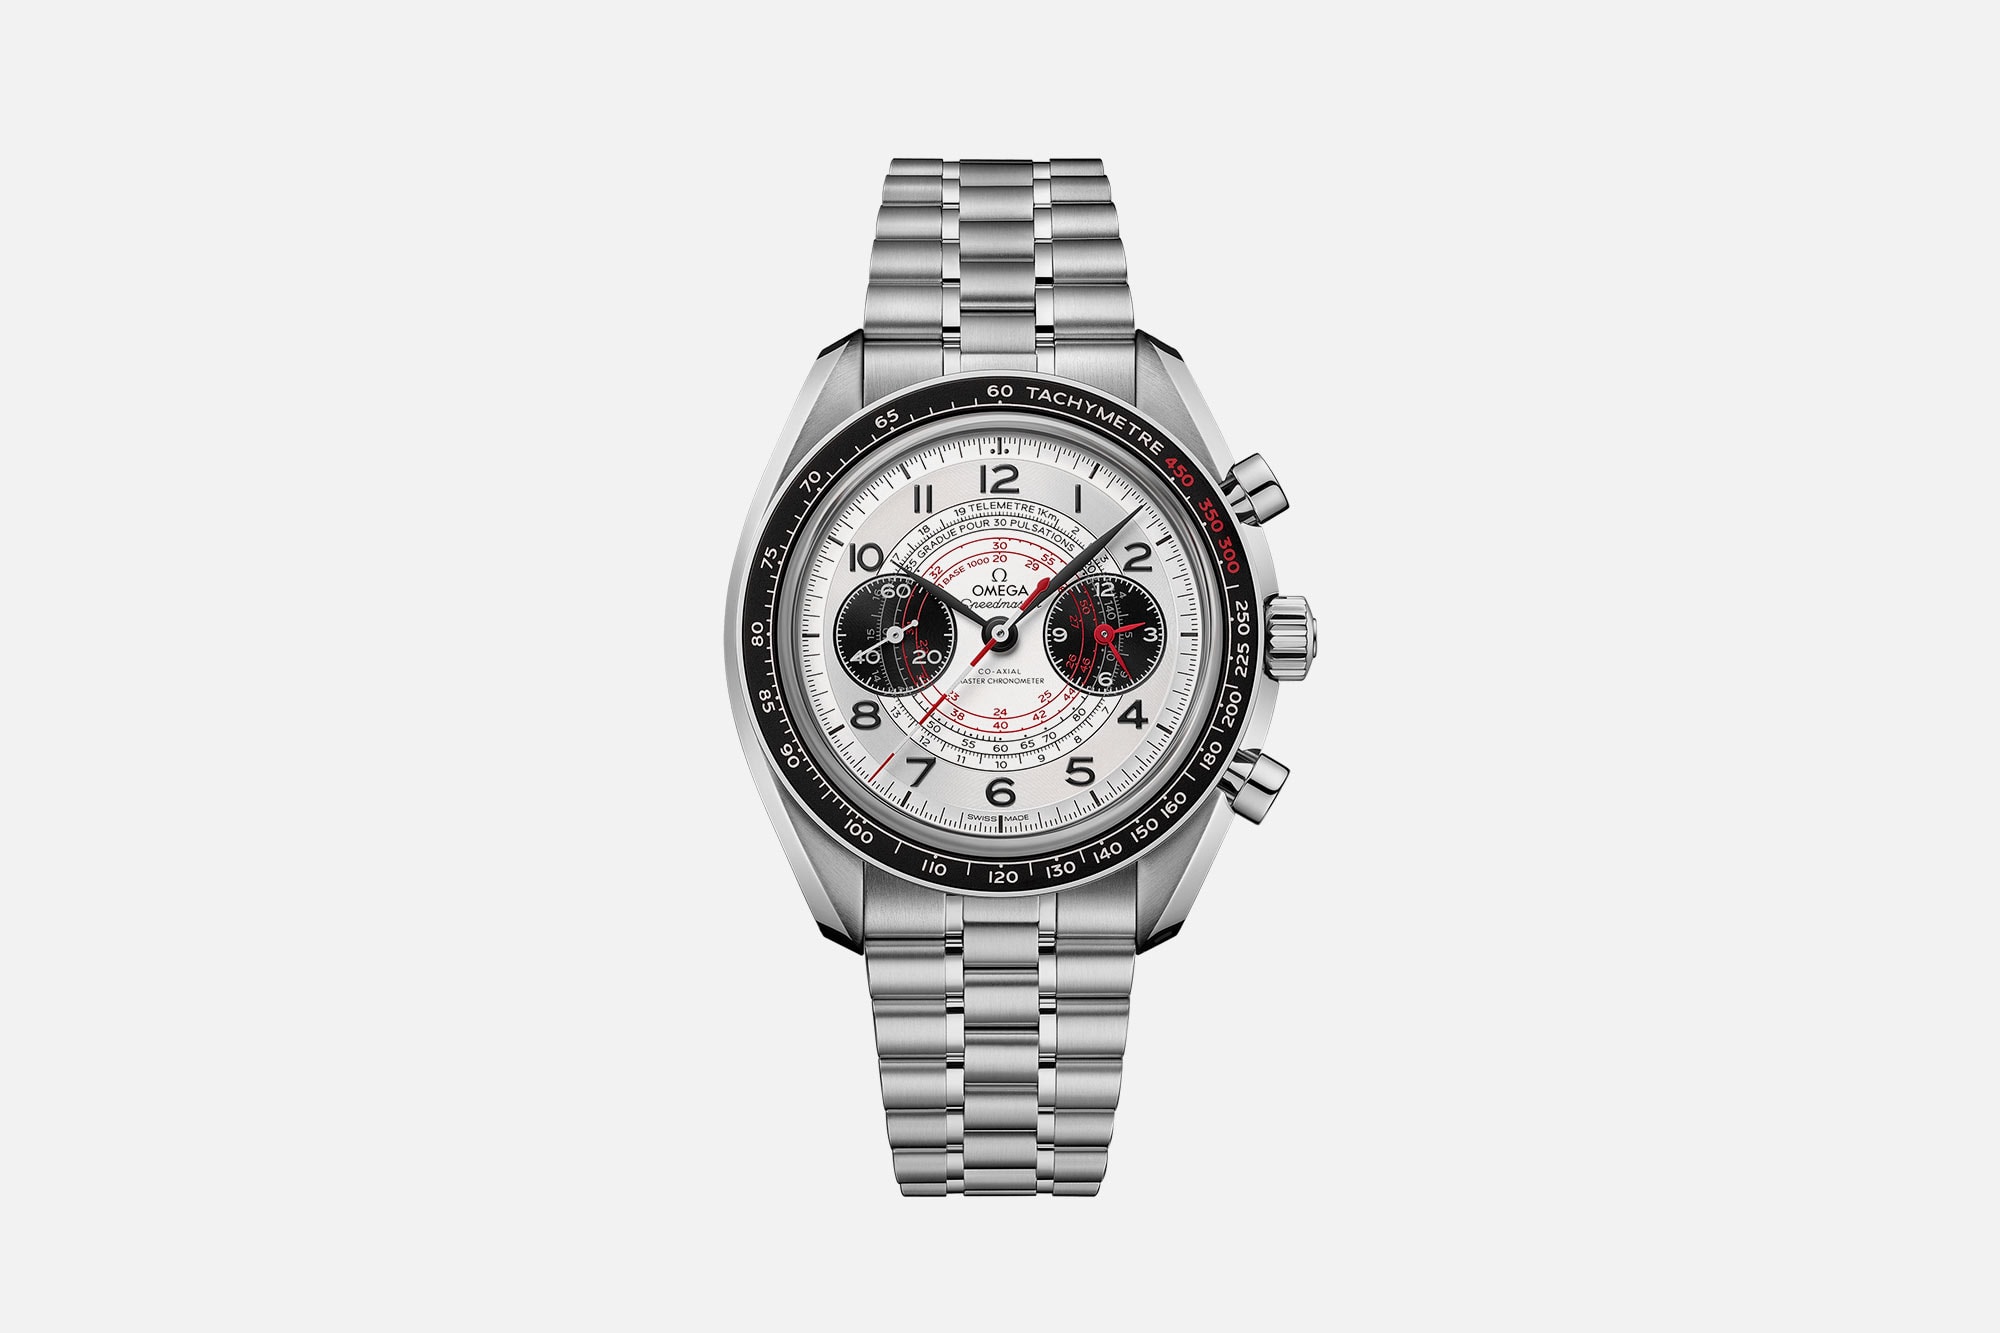 Omega Introduces the Speedmaster Chronoscope, a New Chronograph with a 1940s Inspired Dial